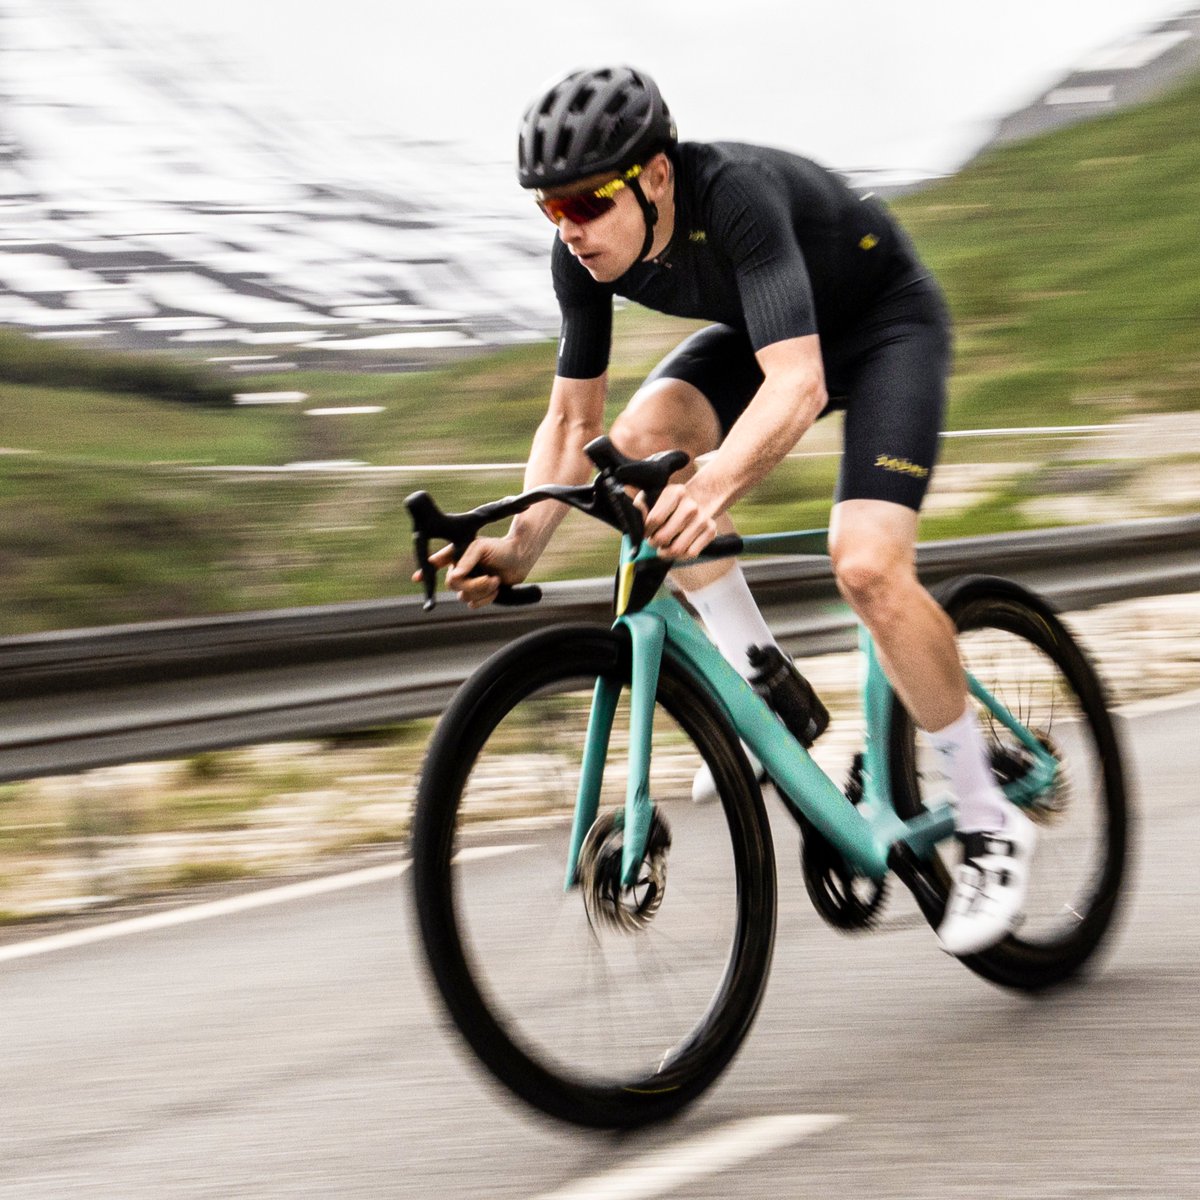 Unapologetically aggressive. The highly-exclusive Tour de France limited edition Oltre RC gives you a rare opportunity to ride the legend.

Shop now 👉bit.ly/3Pi6OsW

#Bianchi #LeTourOfficialBianchi #TDF2023 #RideBianchi #OltreRC #RideTheLegend @LeTour